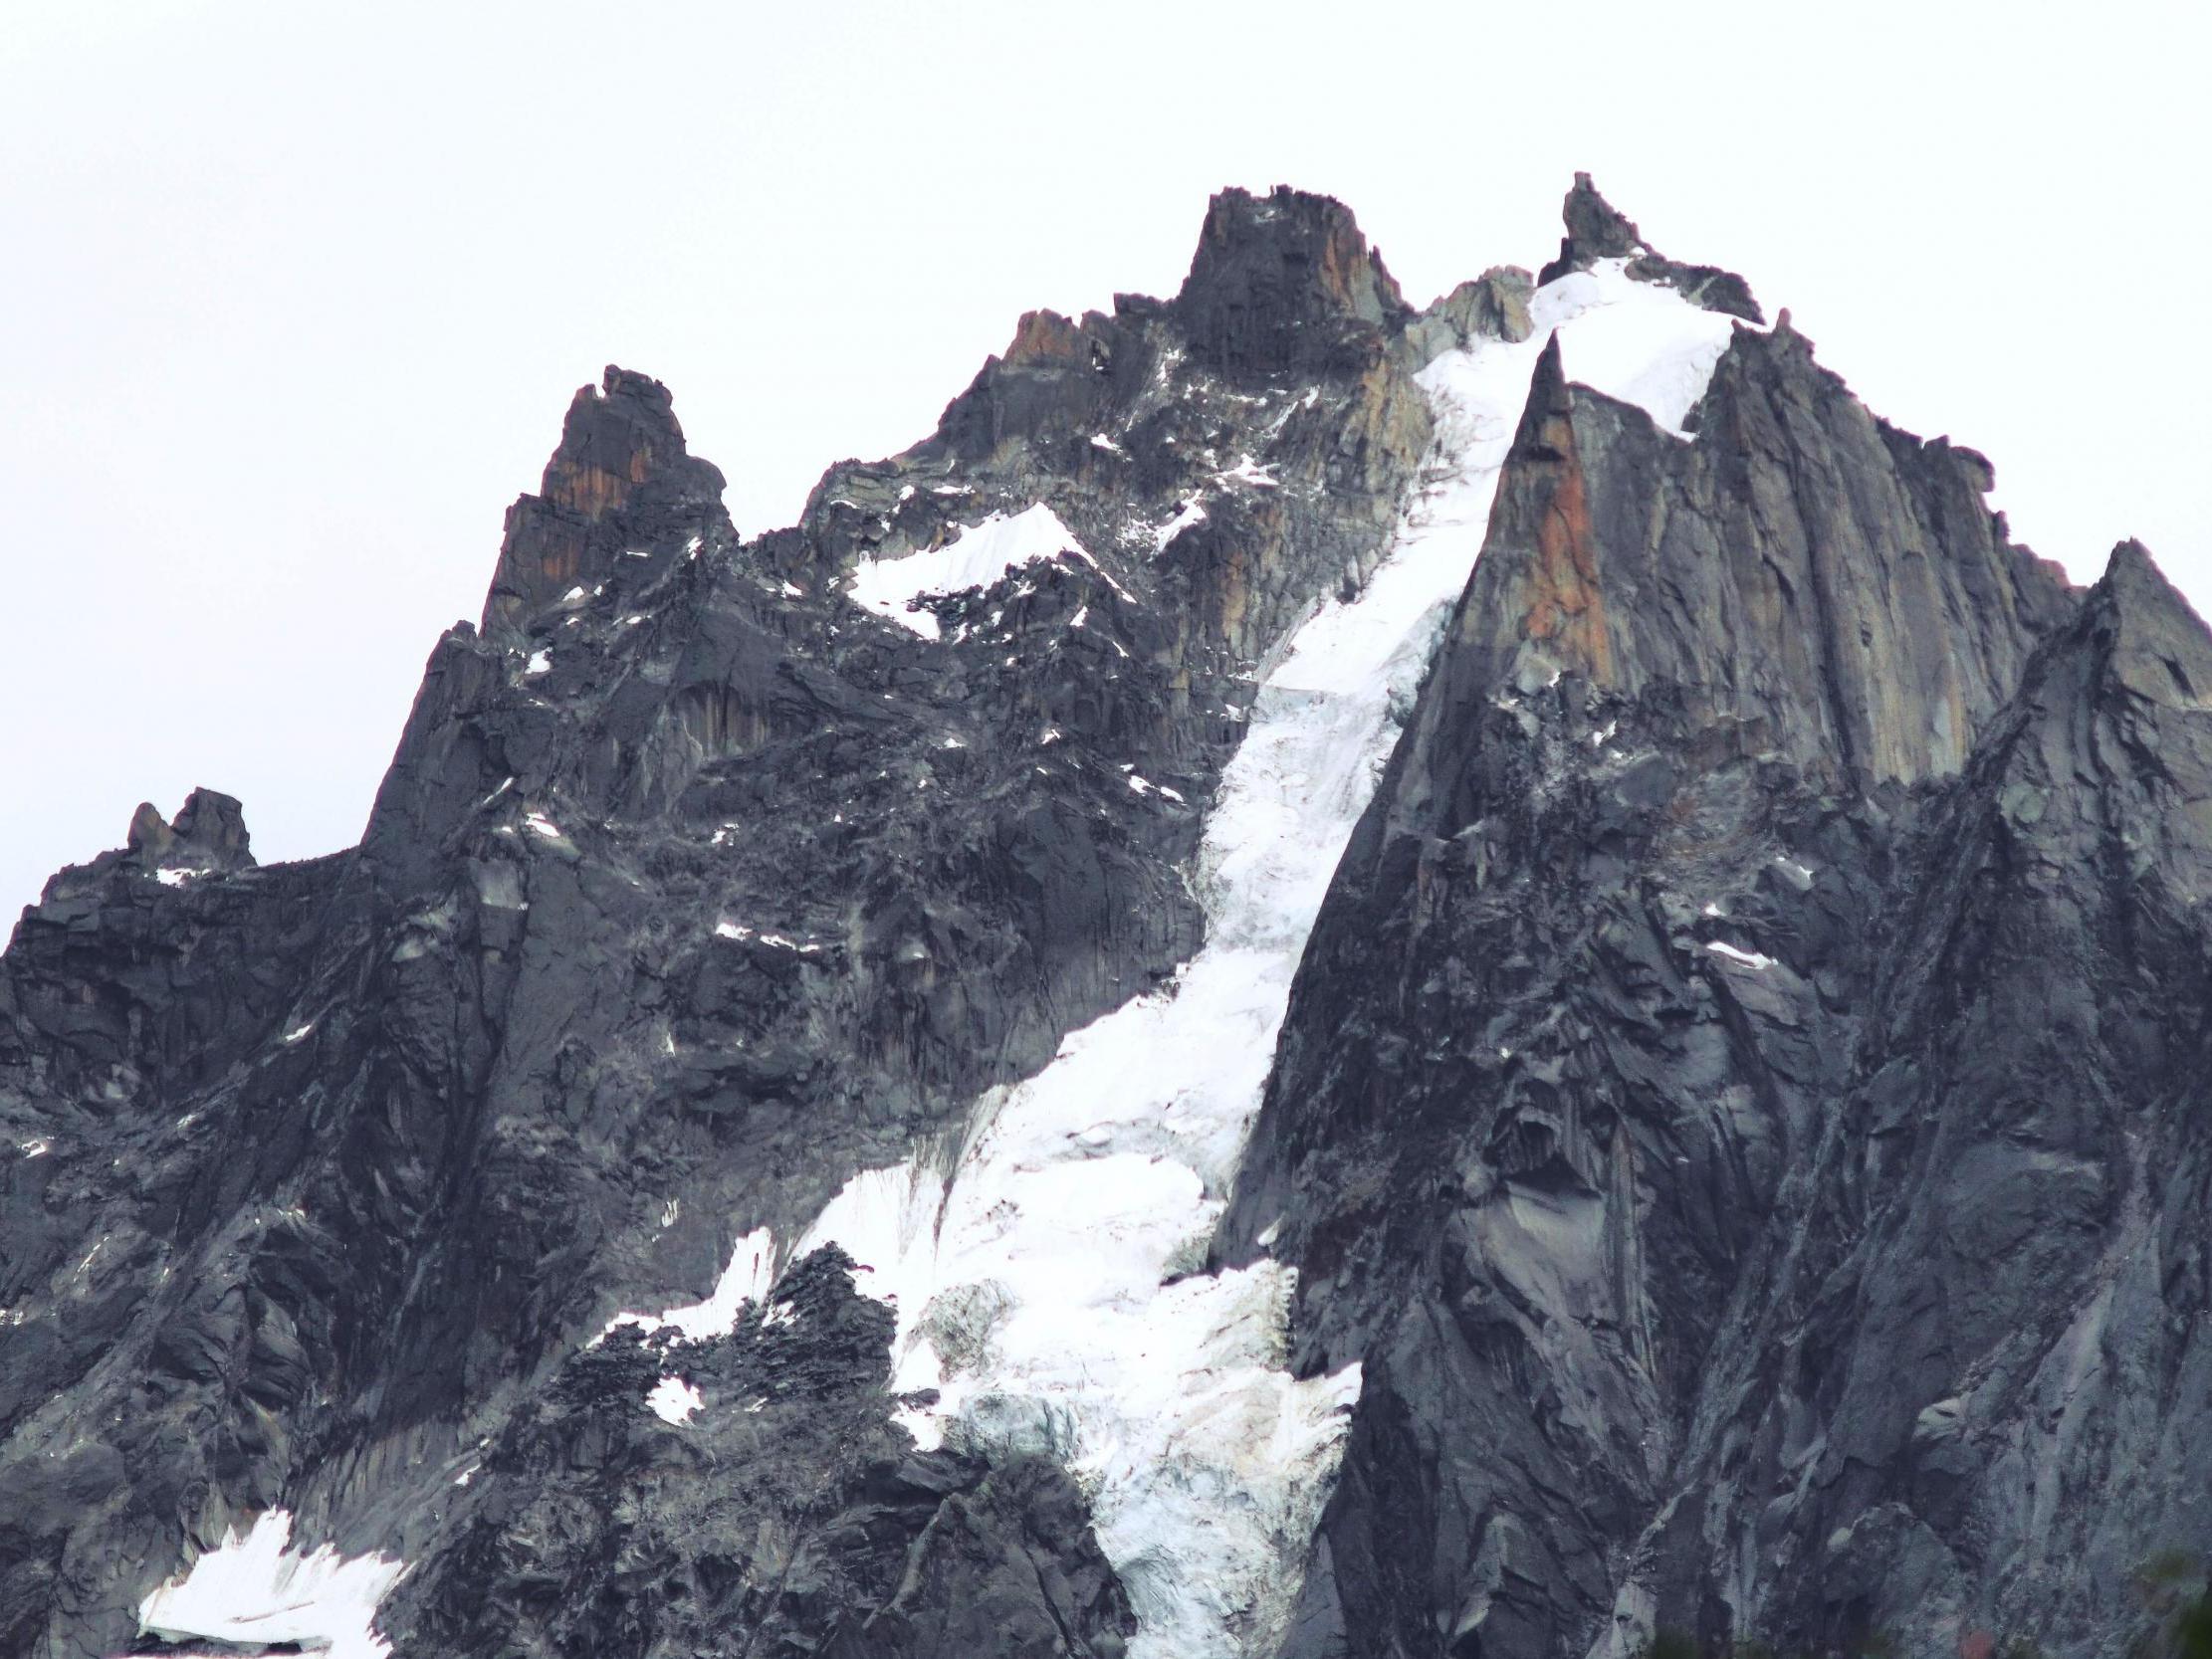 Rescuers had been searching the Mont Blanc massif since the climbers went missing on Tuesday